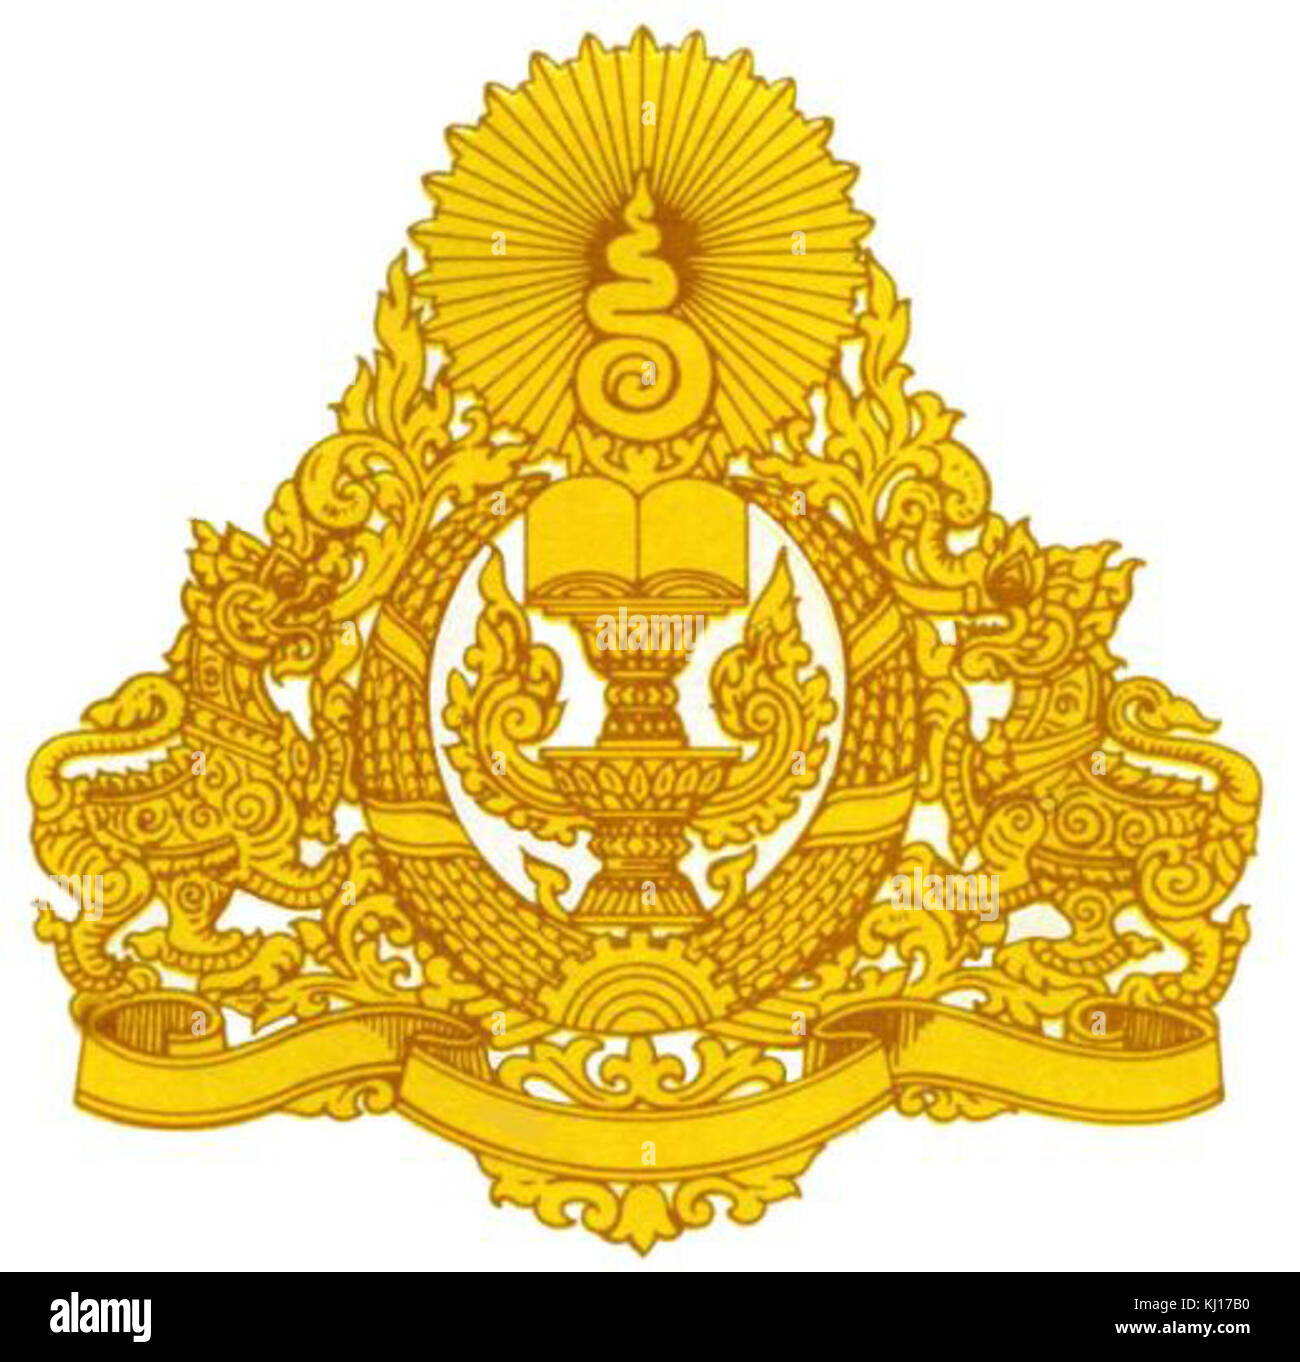 Coat of arms of Coalition Government of Democratic Kampuchea Stock Photo